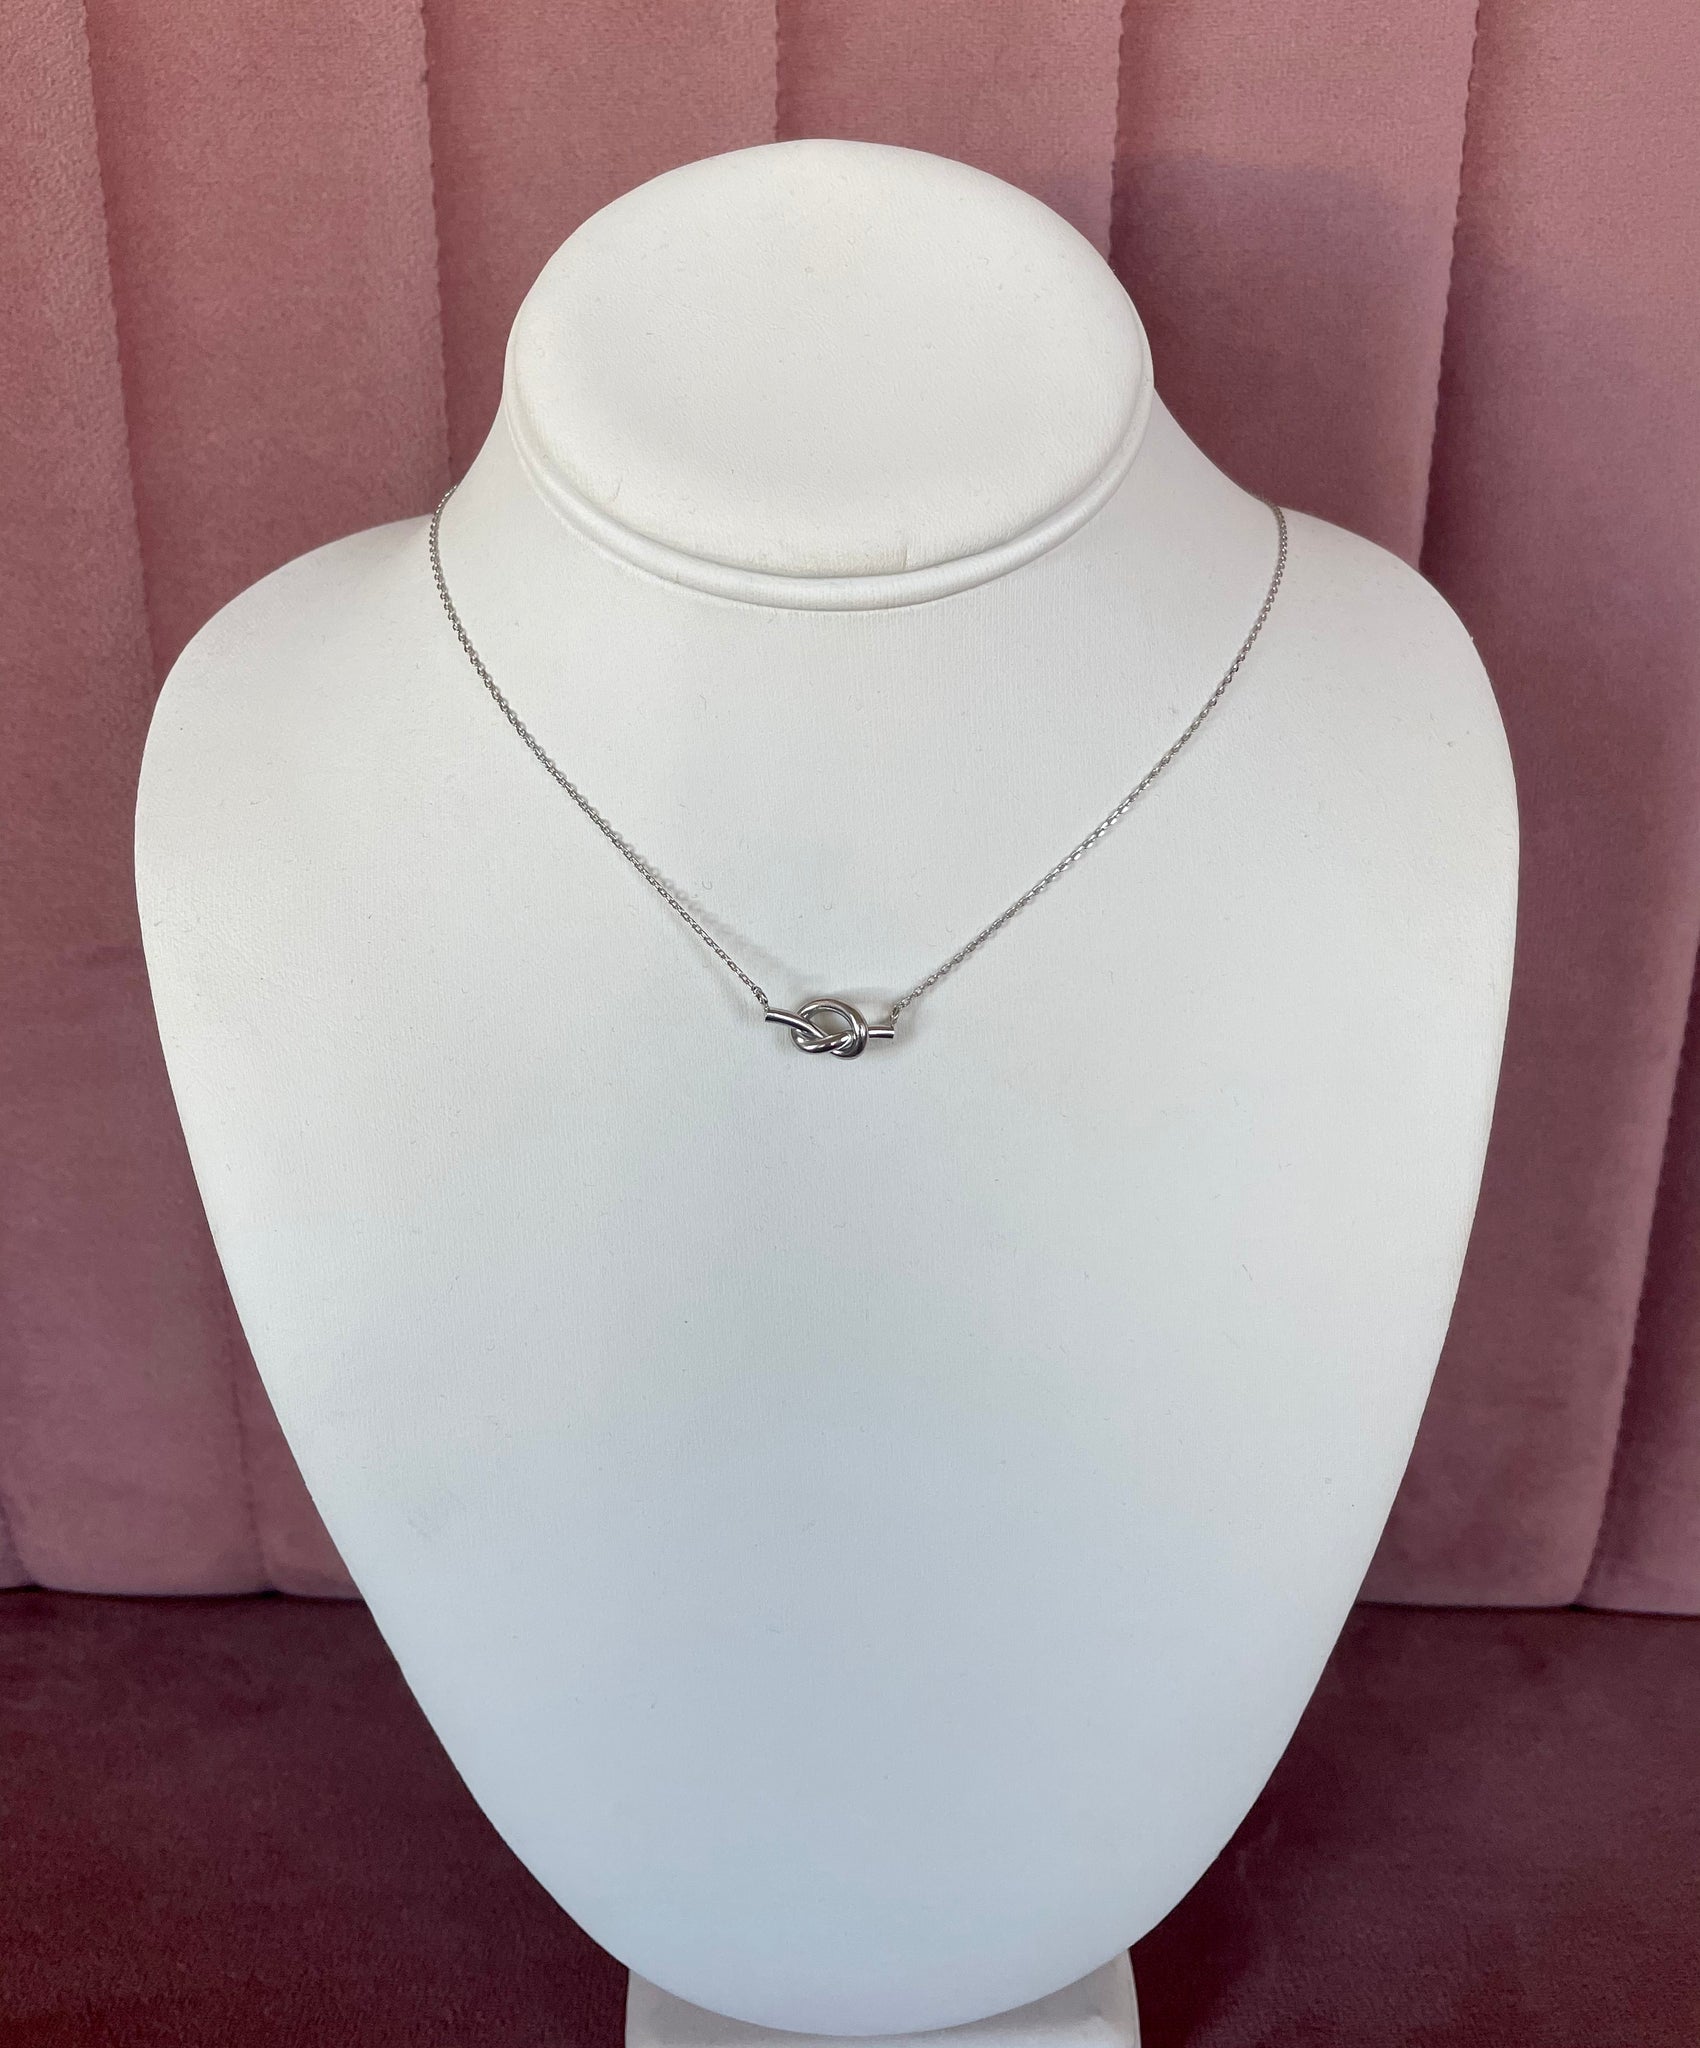 Knot Charm Short Necklace White Gold